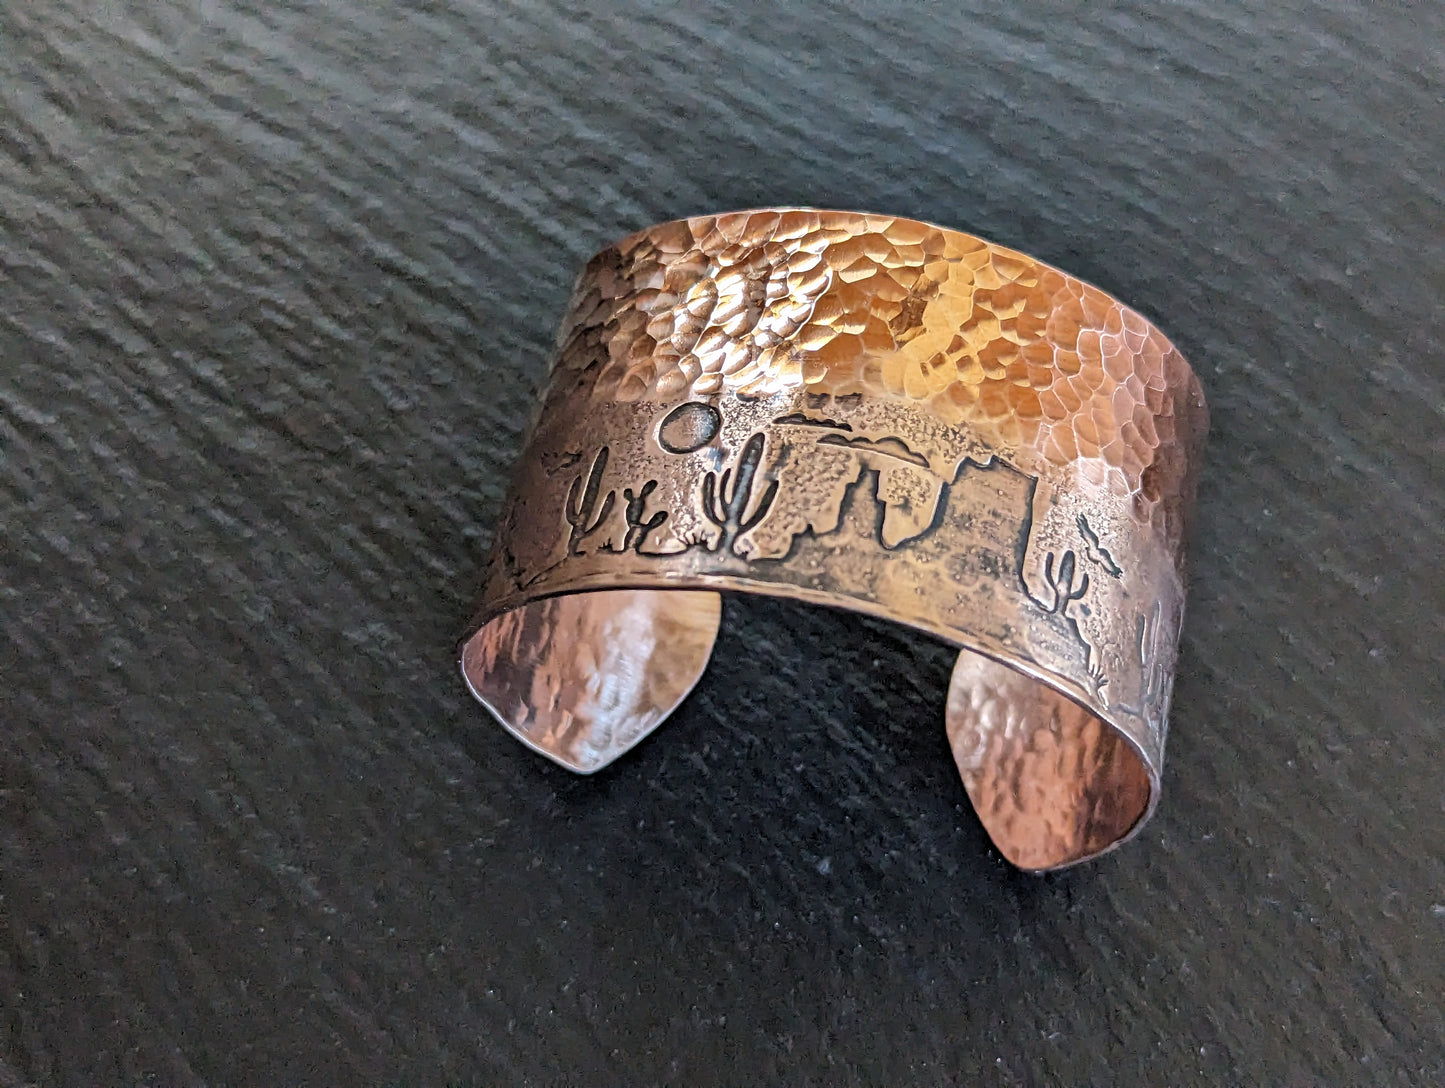 Copper cuff bracelet with hammered texture and cactus and monument mountains - Arizona desert scene